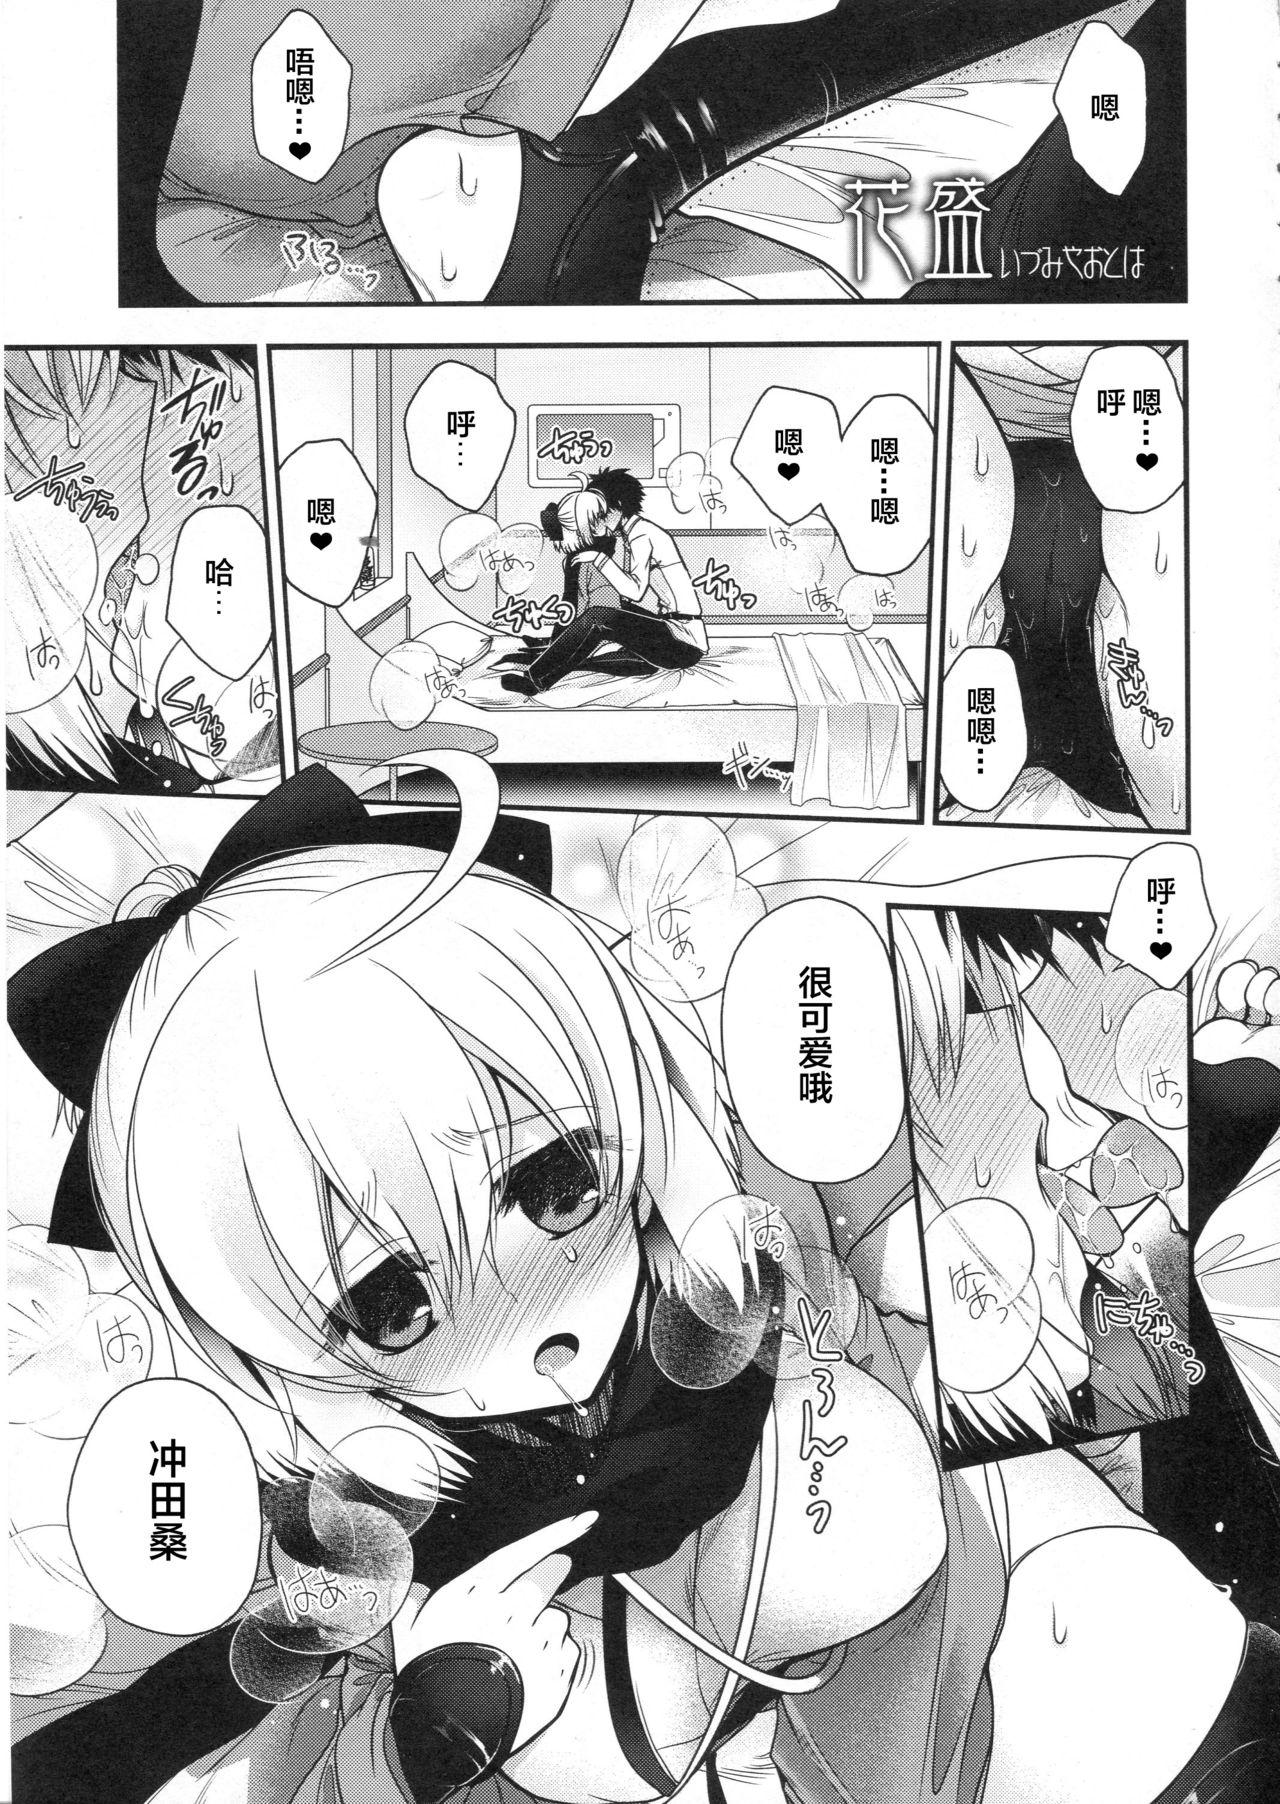 Unshaved My Room My Love - Fate grand order Brunette - Page 4